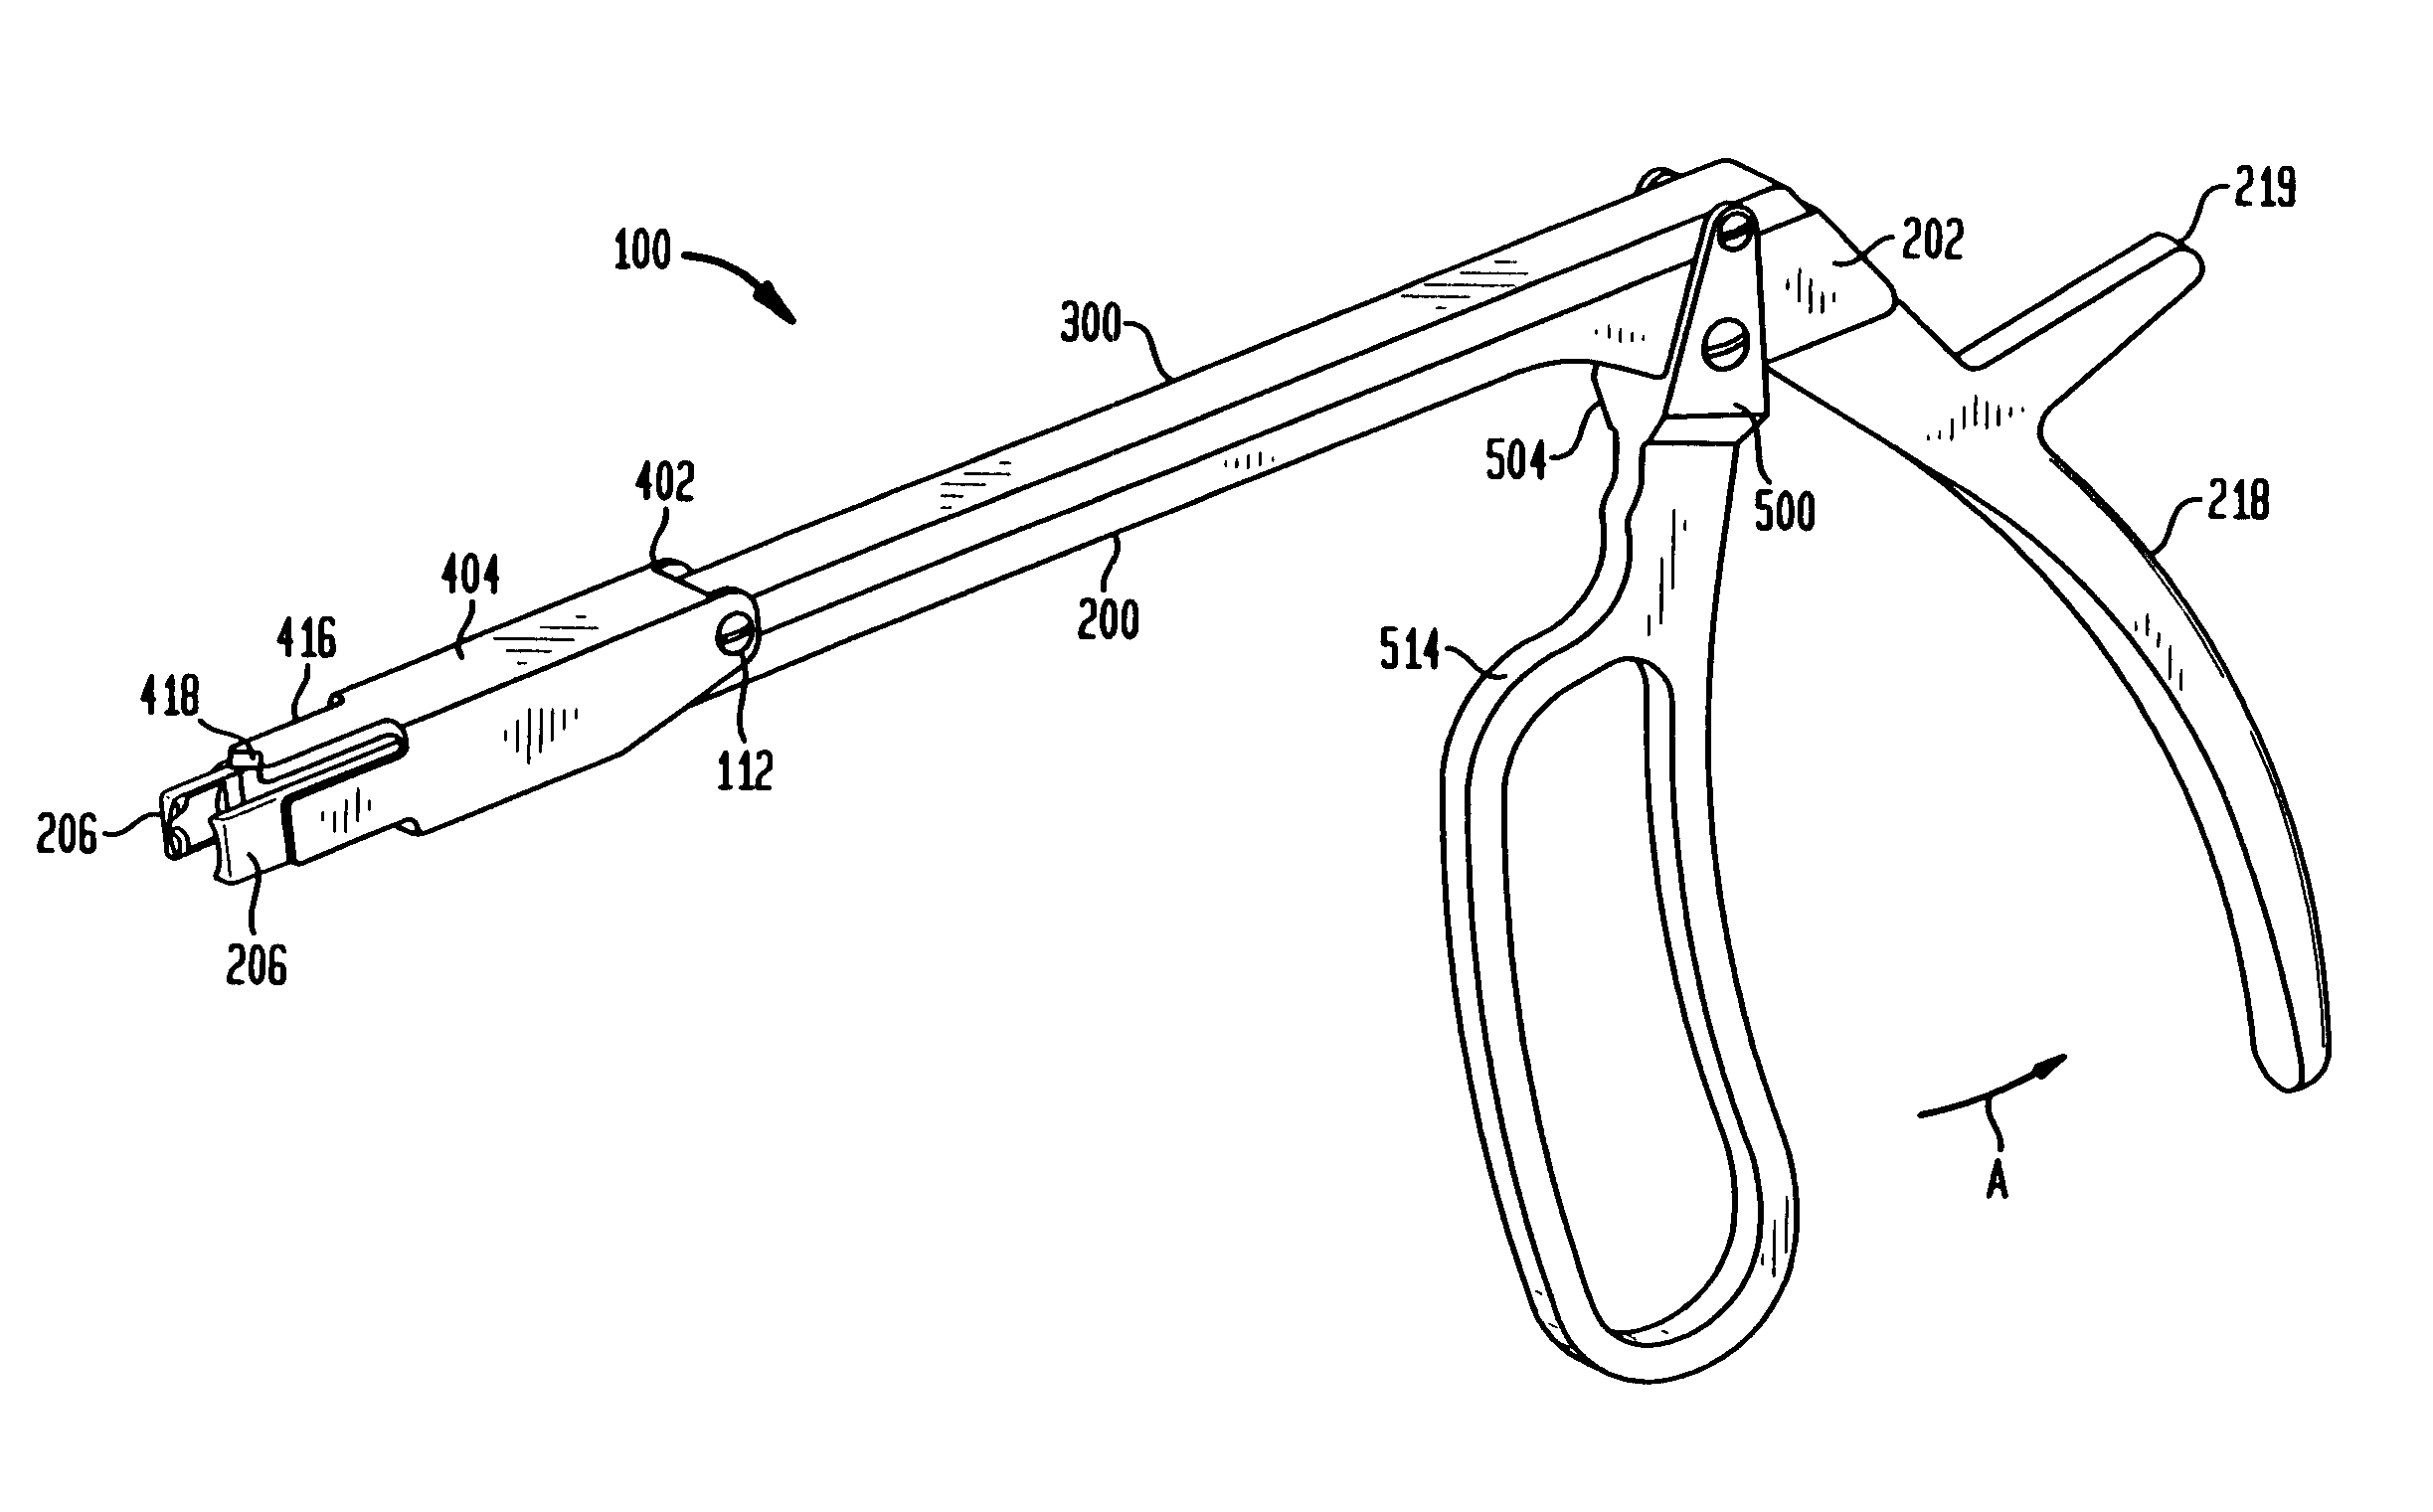 System for use in spinal stabilization